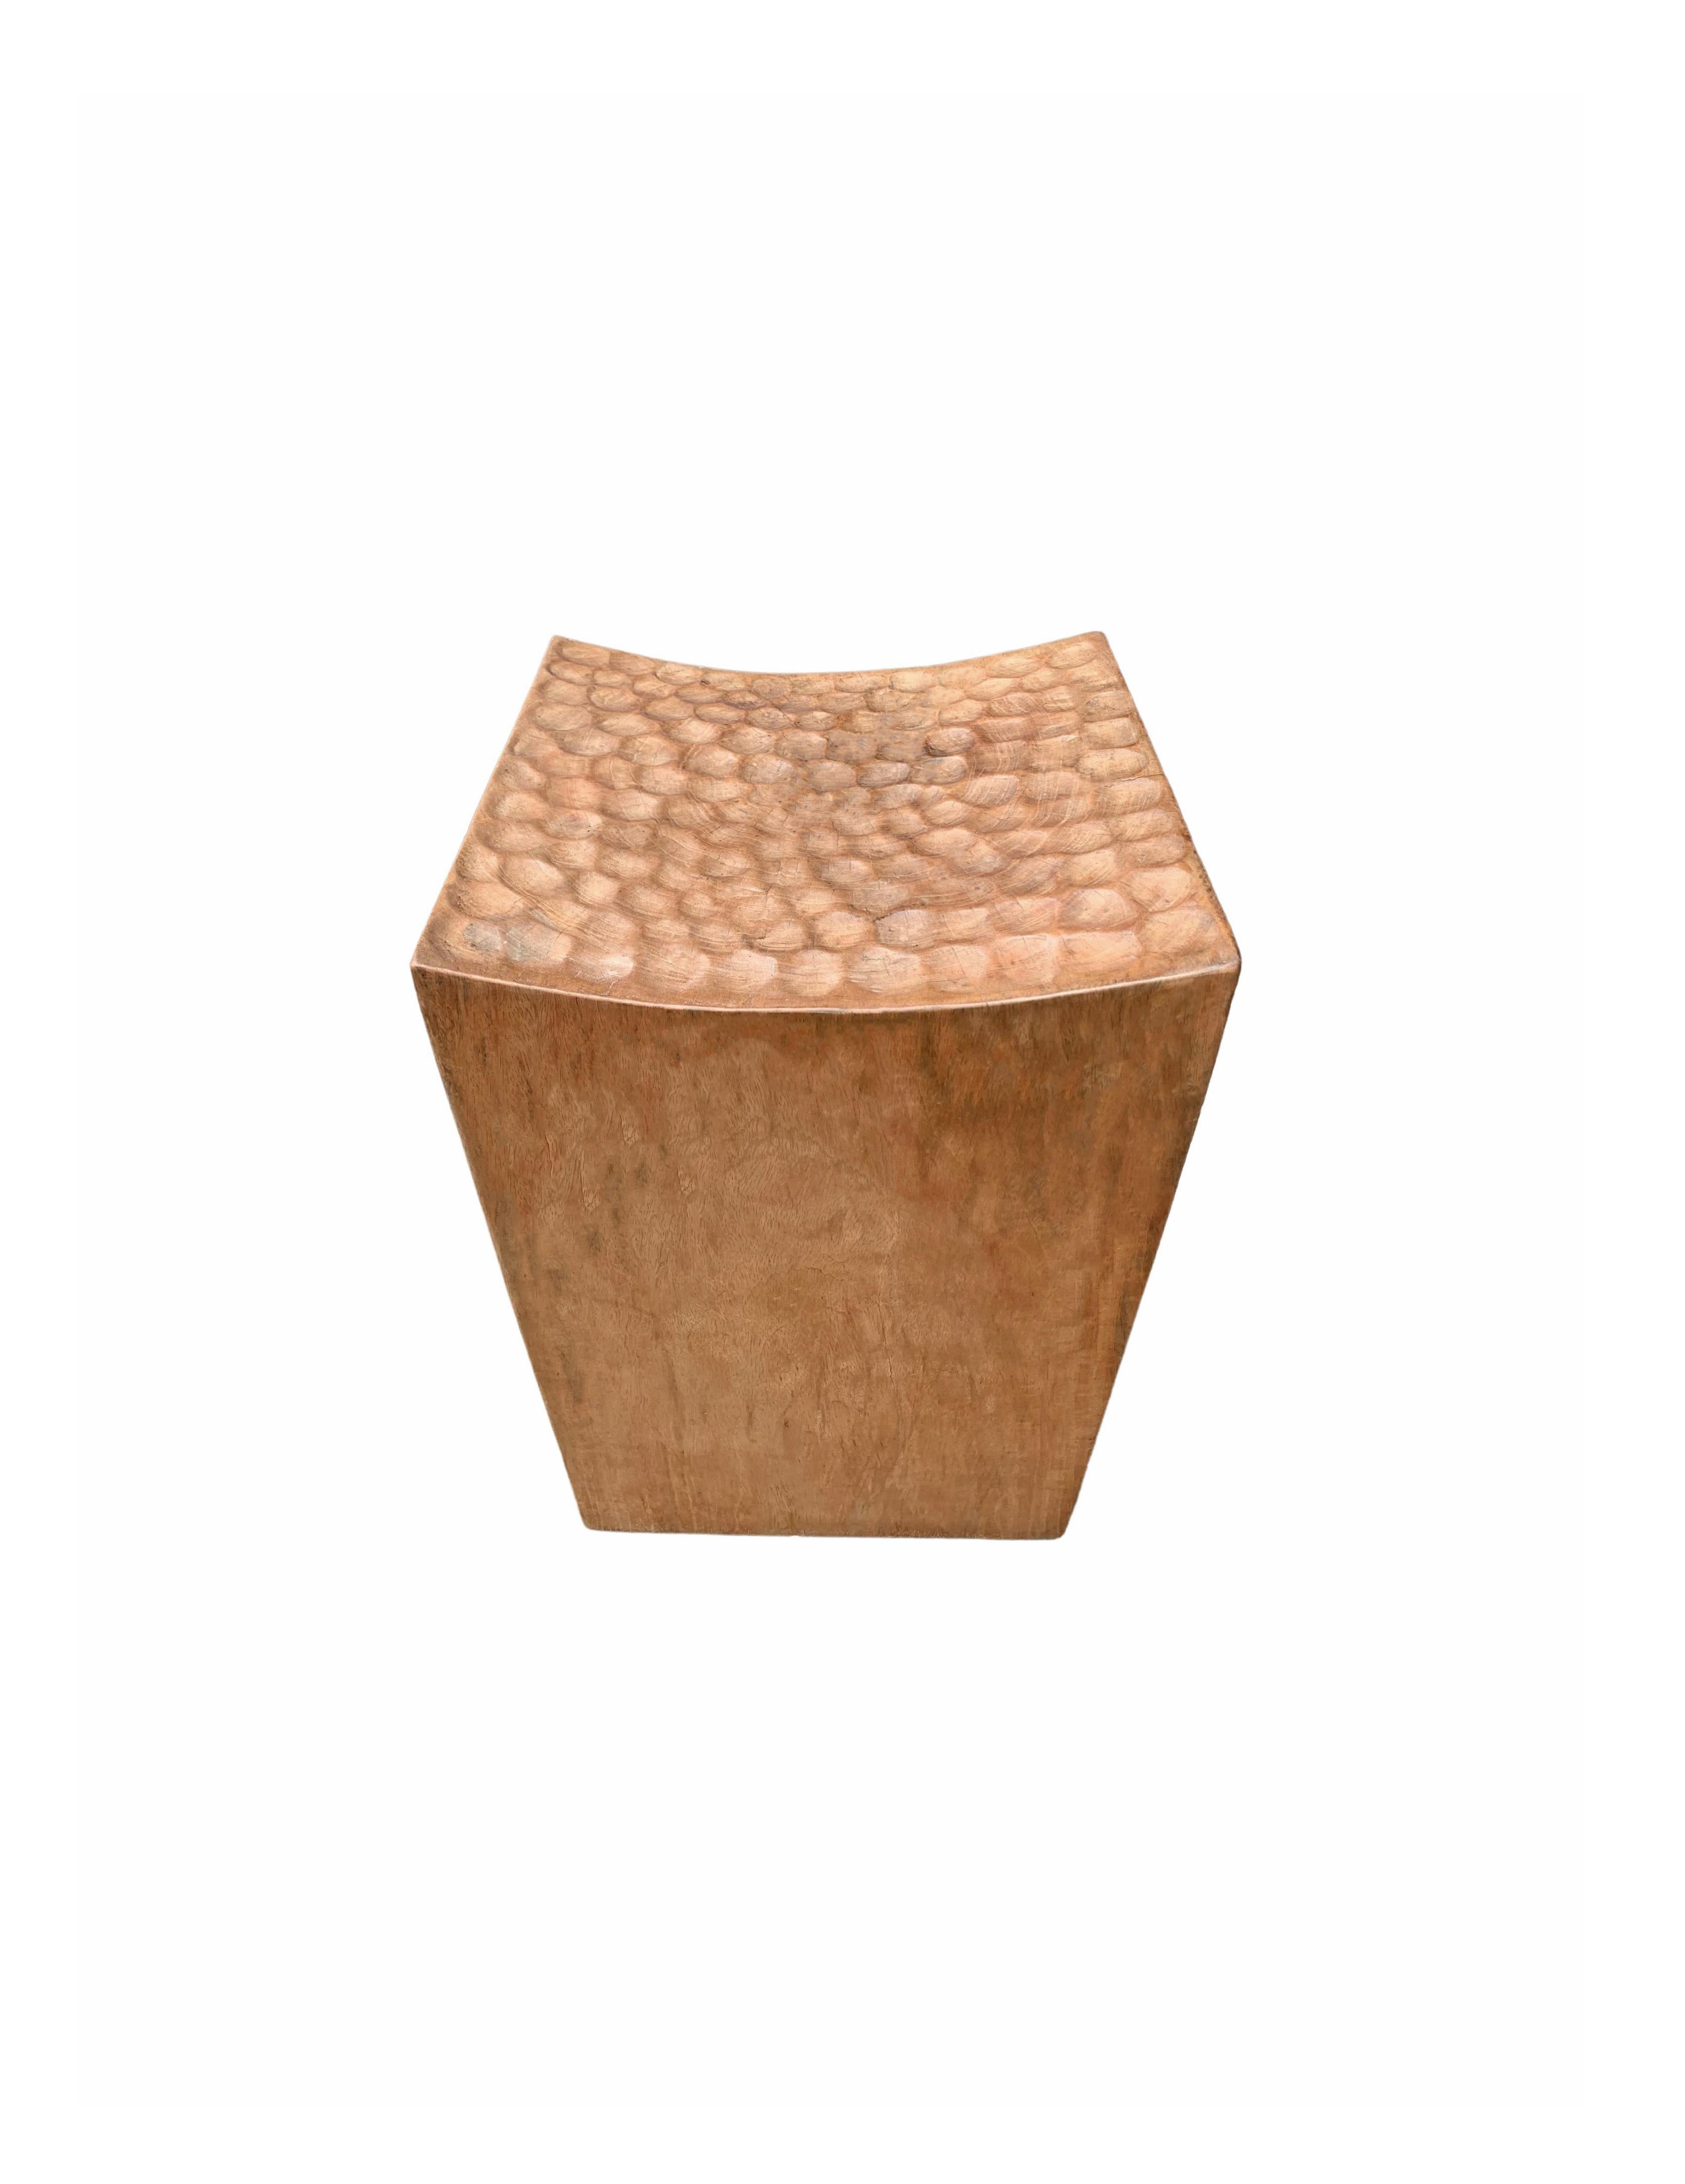 Organic Modern Sculptural Stool Carved from Solid Mango Wood Modern Organic For Sale